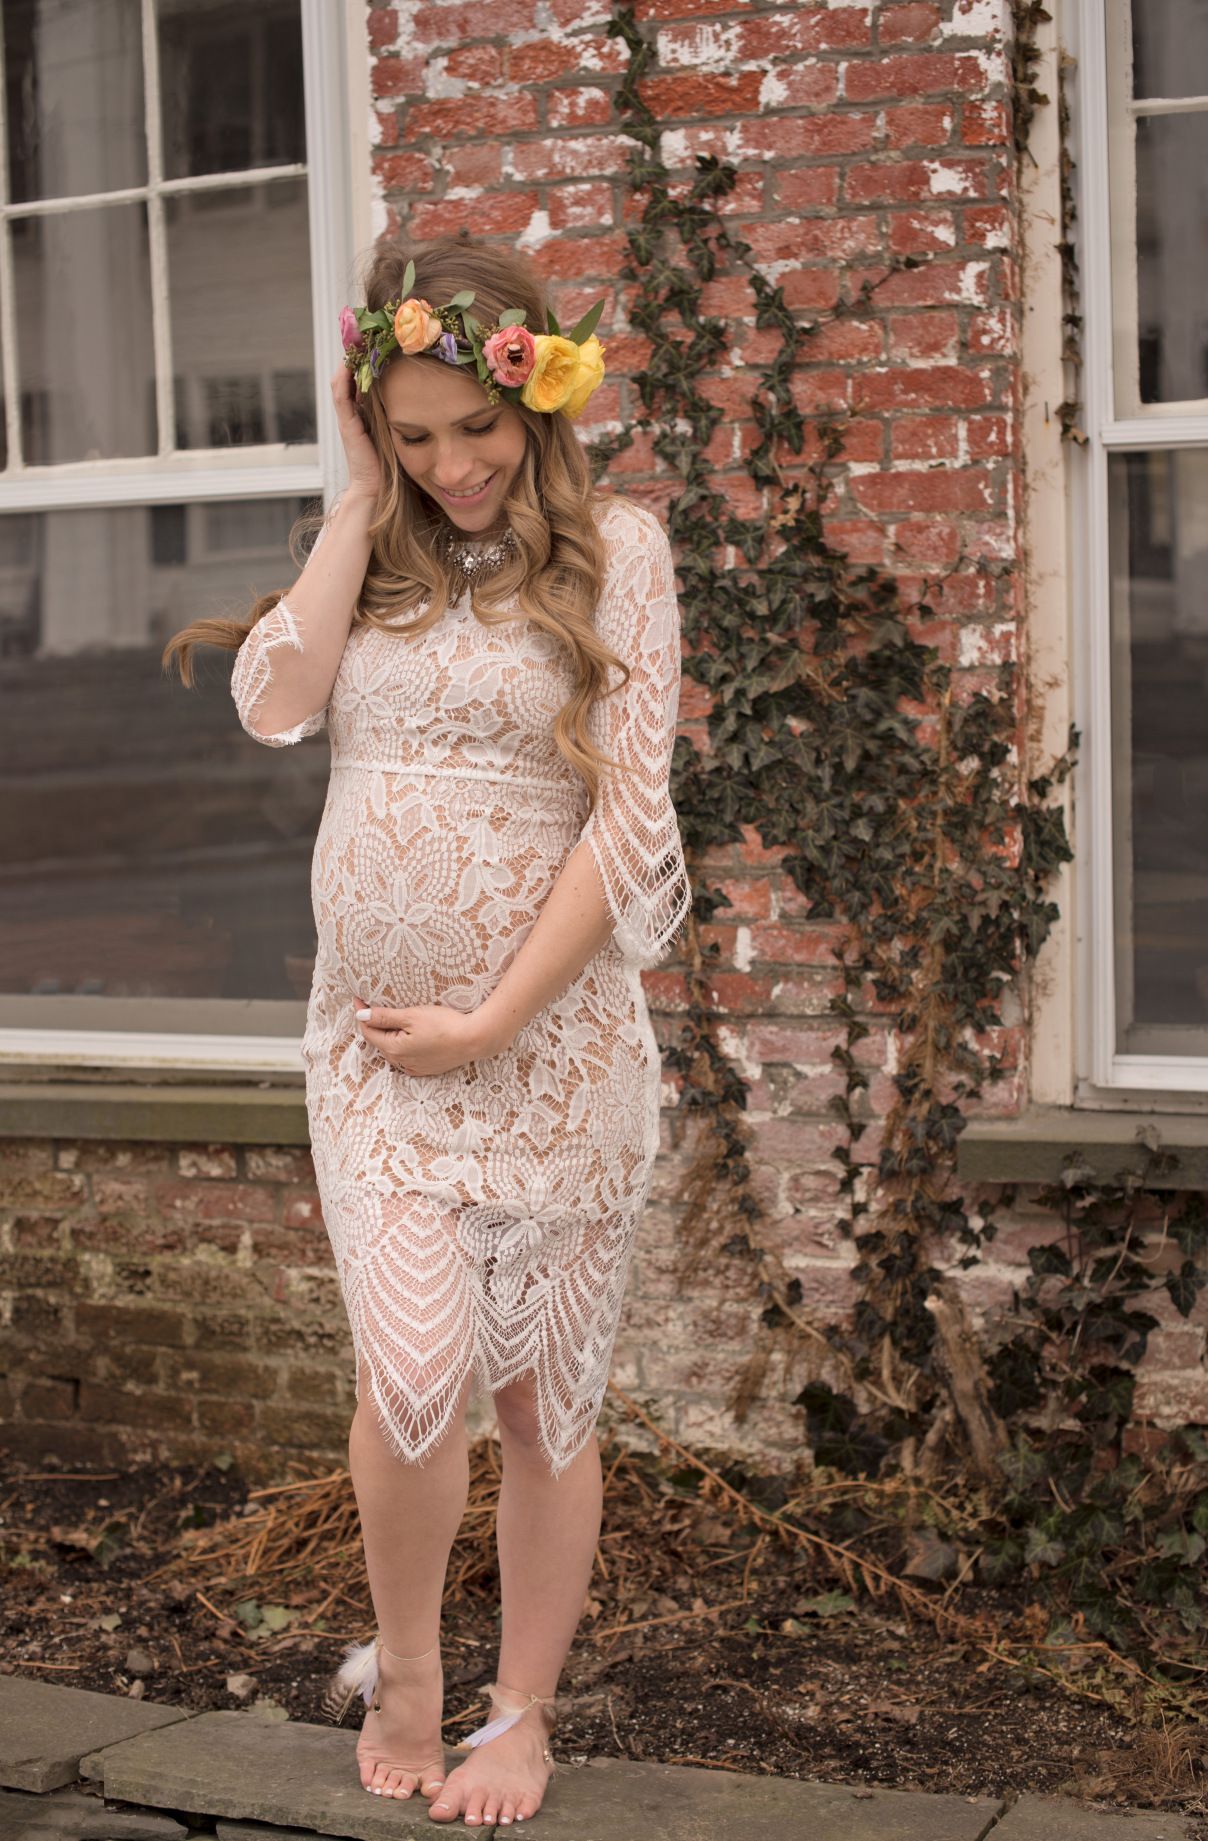 Full Size of Baby Shower:pink Maternity Dress Maternity Gowns For Photography Maternity Dresses For Baby Shower Mom And Dad Baby Shower Outfits Baby Shower Dresses Cute Inexpensive Maternity Clothes Maternity Evening Gowns Plus Size Maternity Dresses For Baby Shower